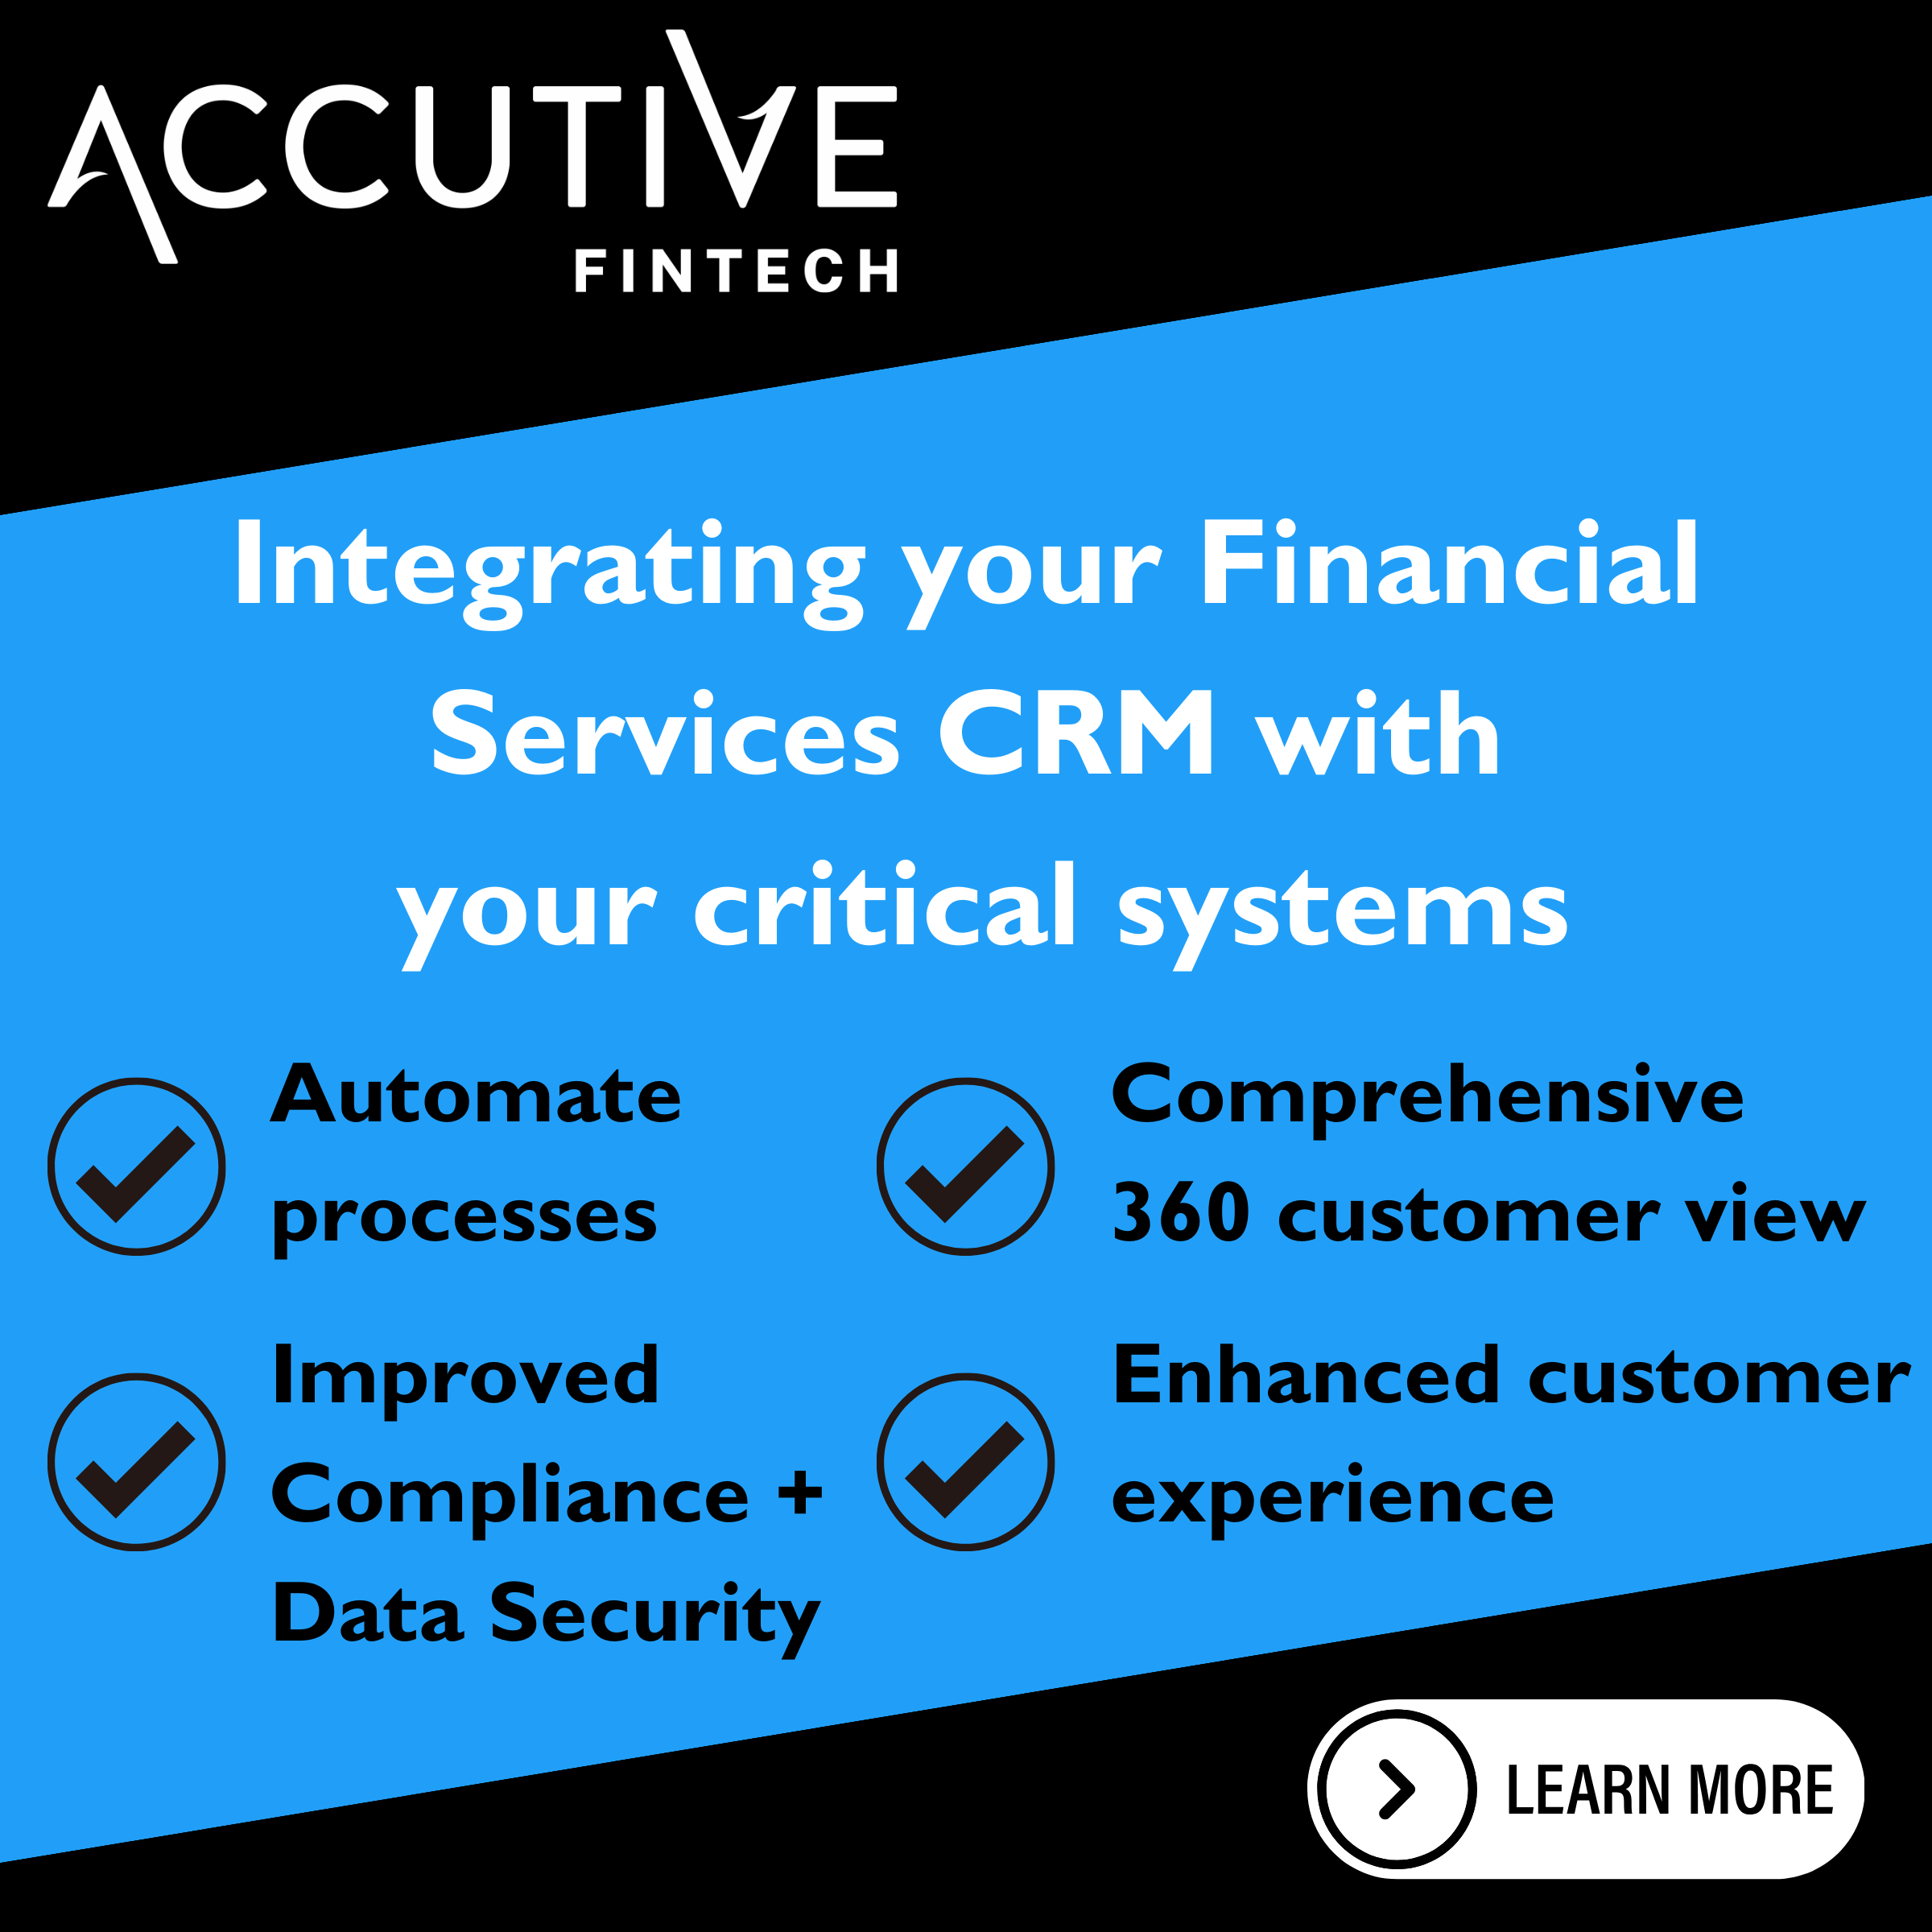 Financial services CRM integrated with critical systems for seamless operations.